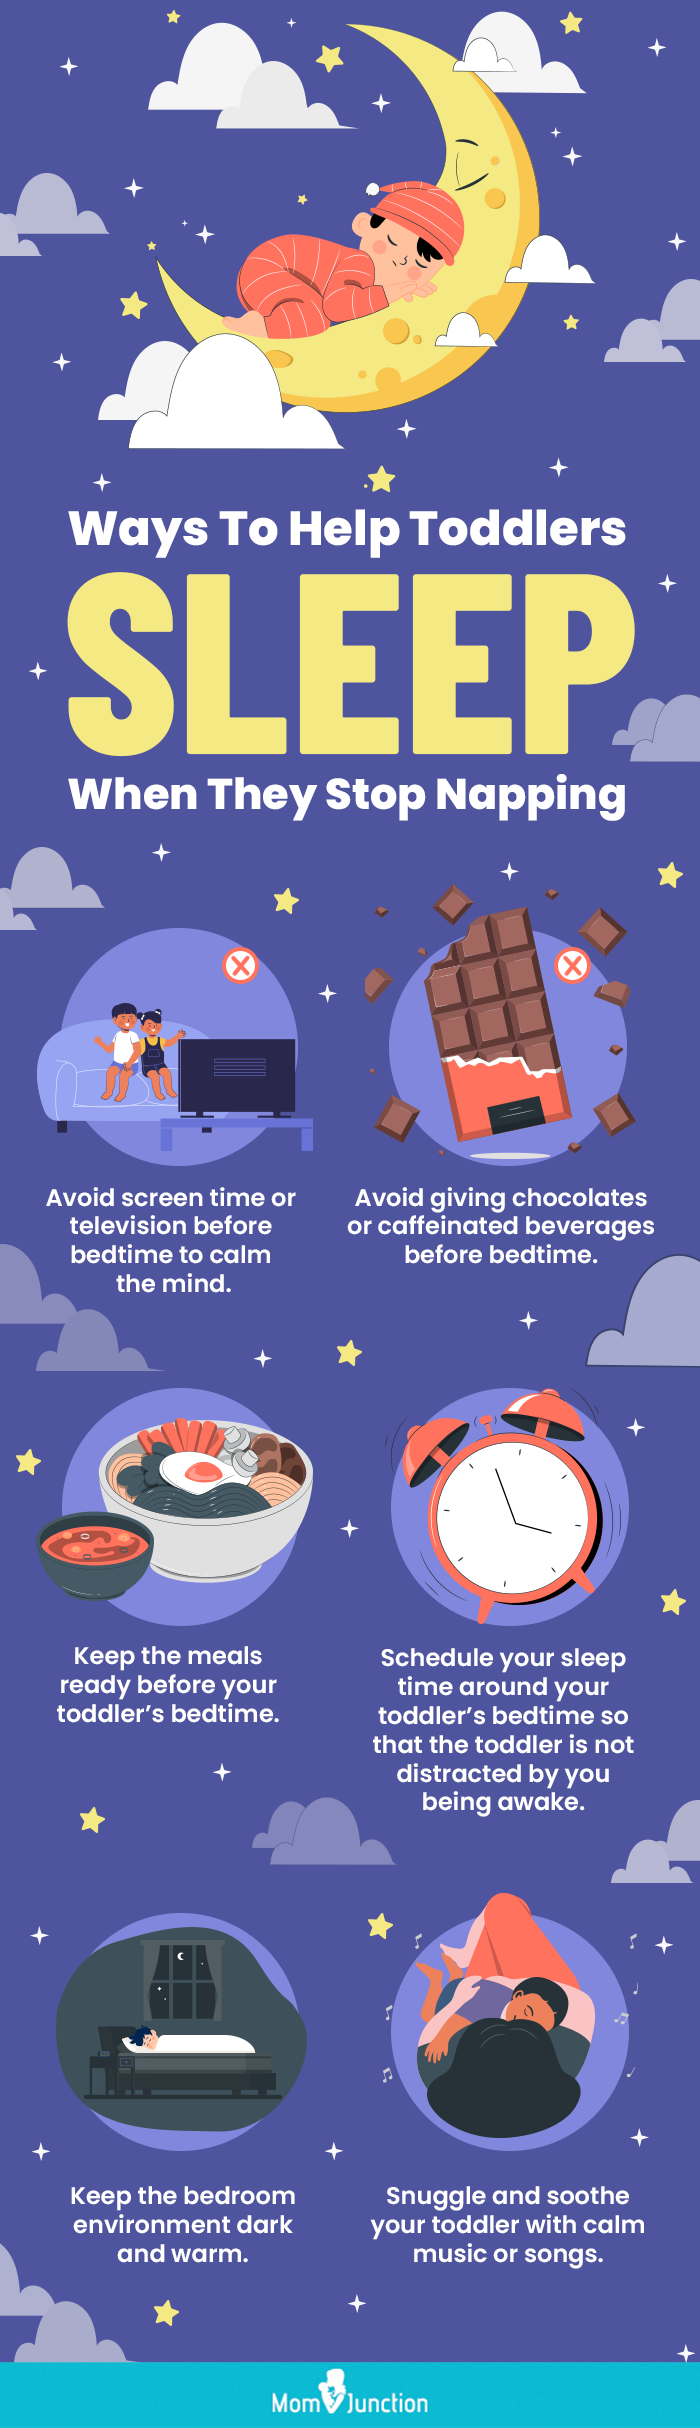 ways to help toddlers sleep when they stop napping (infographic)